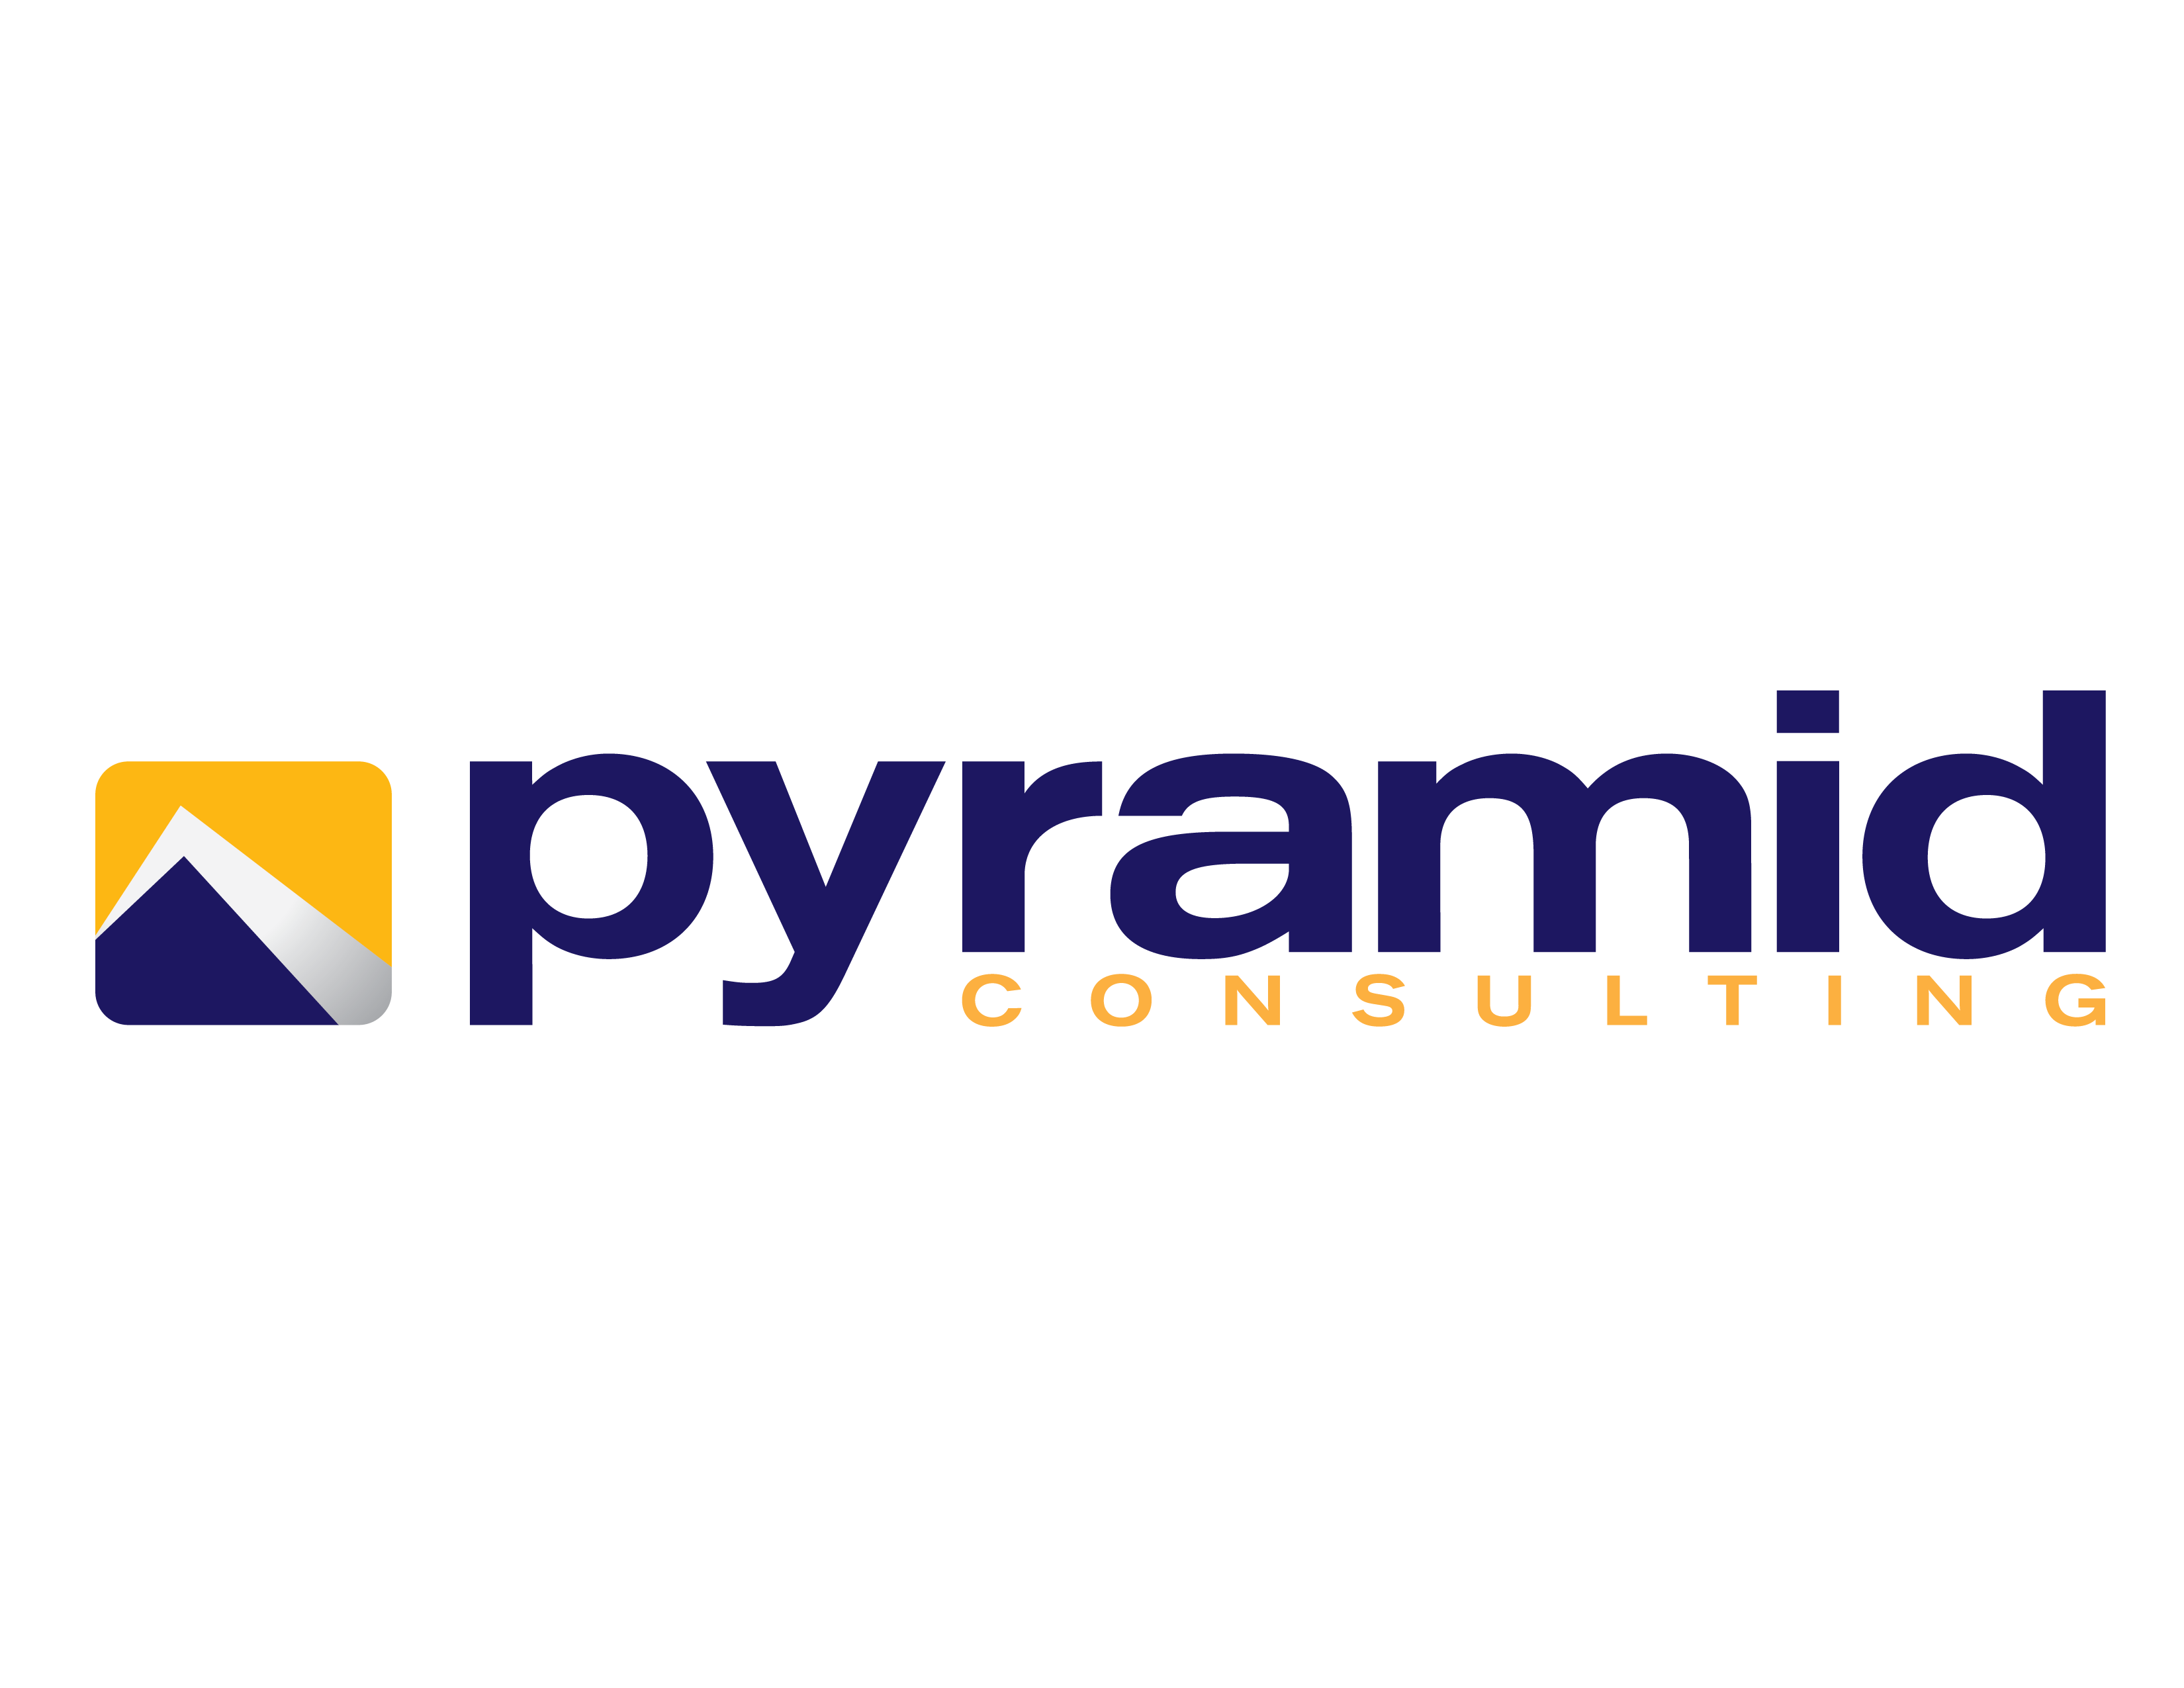 Pyramid Consulting